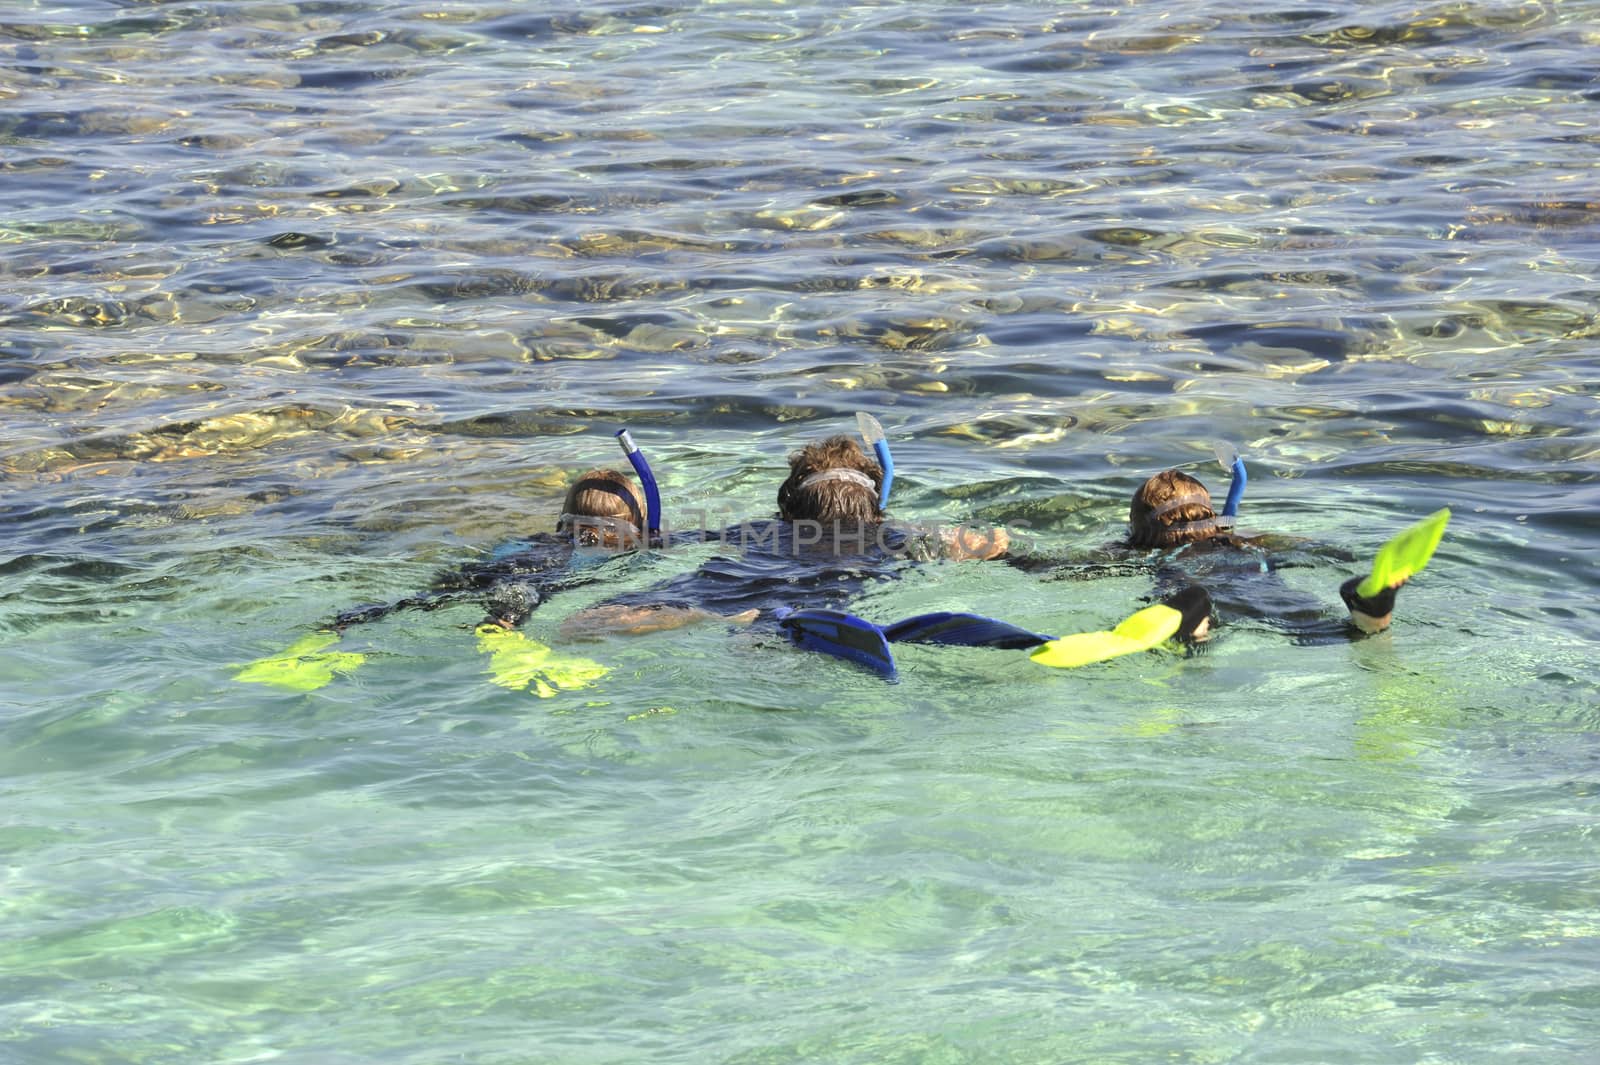 Family snorkeling in a tropical lagoon by paulvinten